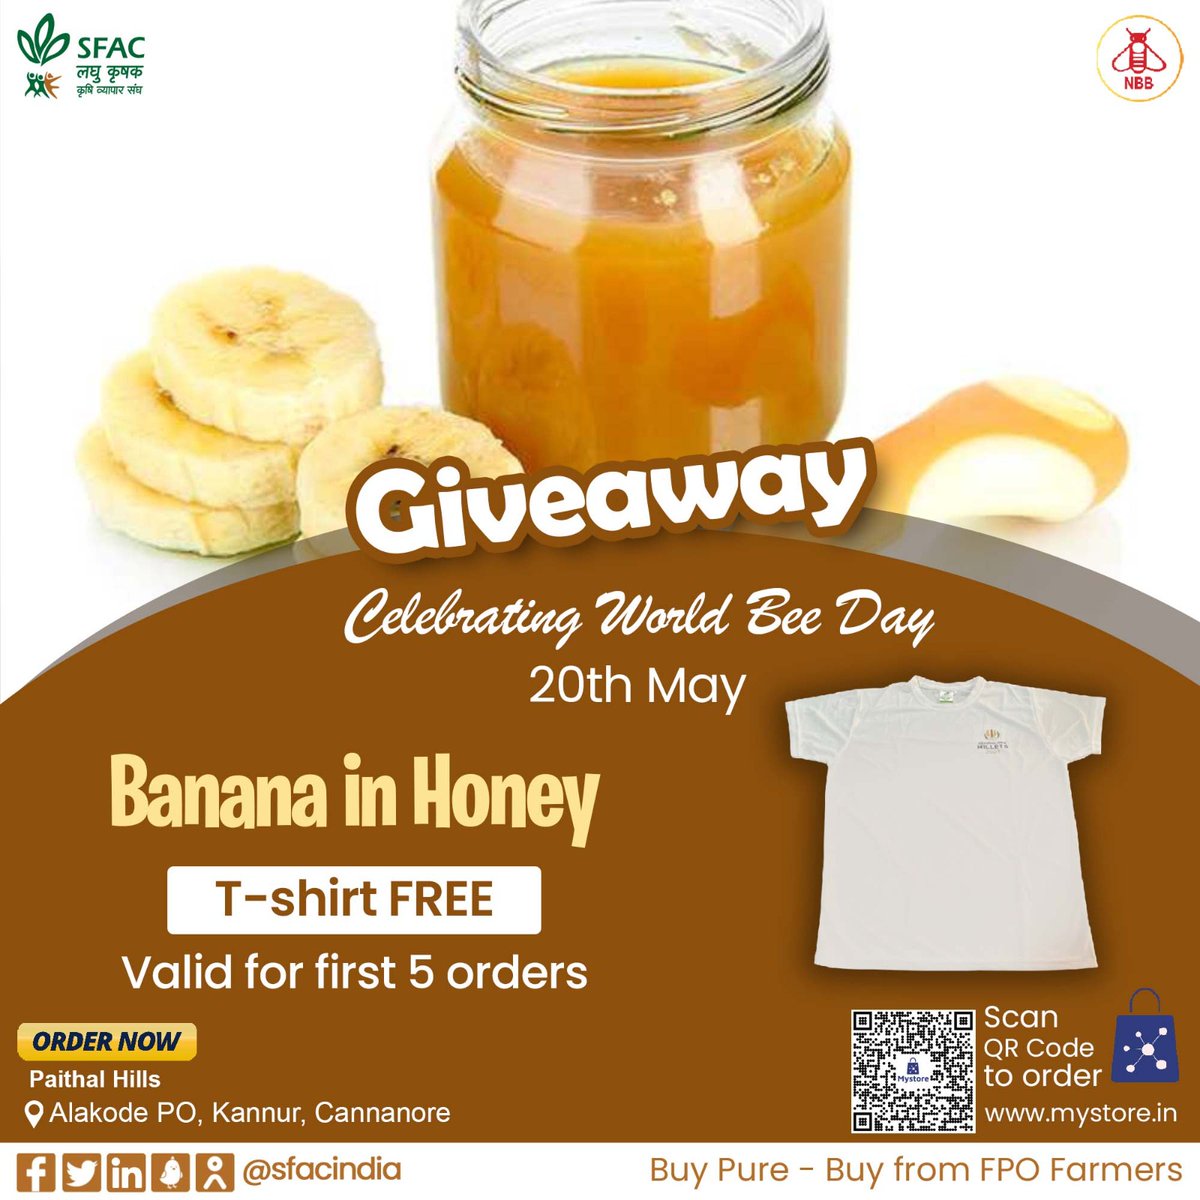 Giveaway🎁 on World Bee Day 20th May Stay fit & WIN gift Buy pure honey preserved with banana. The natural energy booster & nourisher. 📌Valid for first 5 orders Order straight from FPO farmers at👇 mystore.in/en/product/382… 🐝 @tribesindia #NBB #VocalForLocal #healthy #tasty